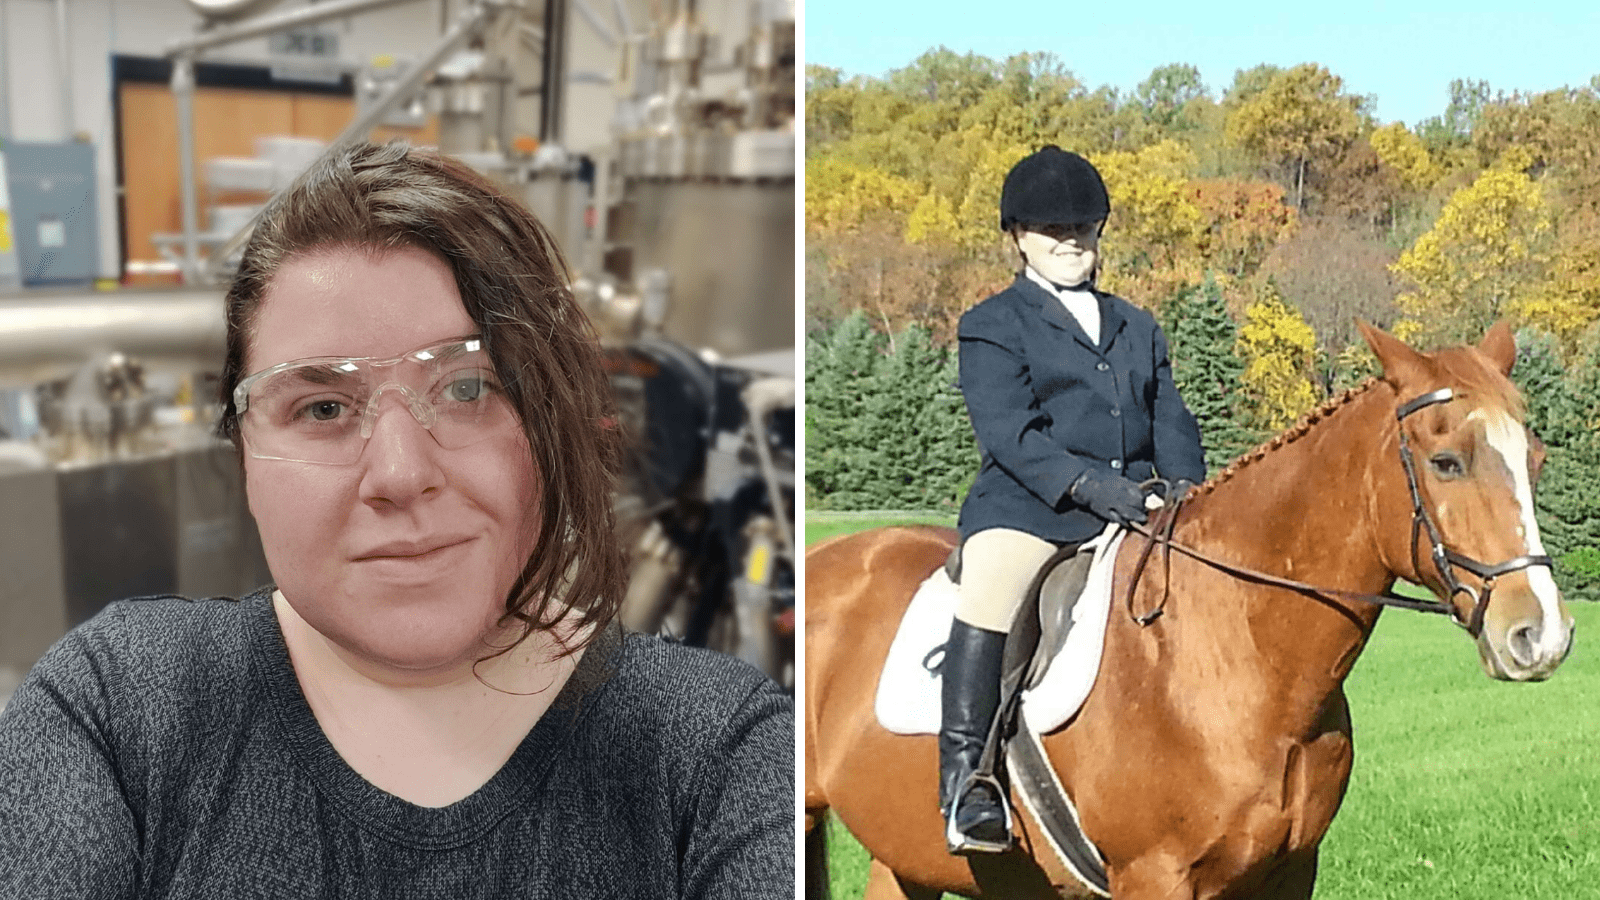 A 2-picture collage of IRG2 trainee, Angel Gordon. Left picture is a selfie of Angel in the lab, and right picture is an action shot of Angel riding a horse with equestrian outfit and equipment.